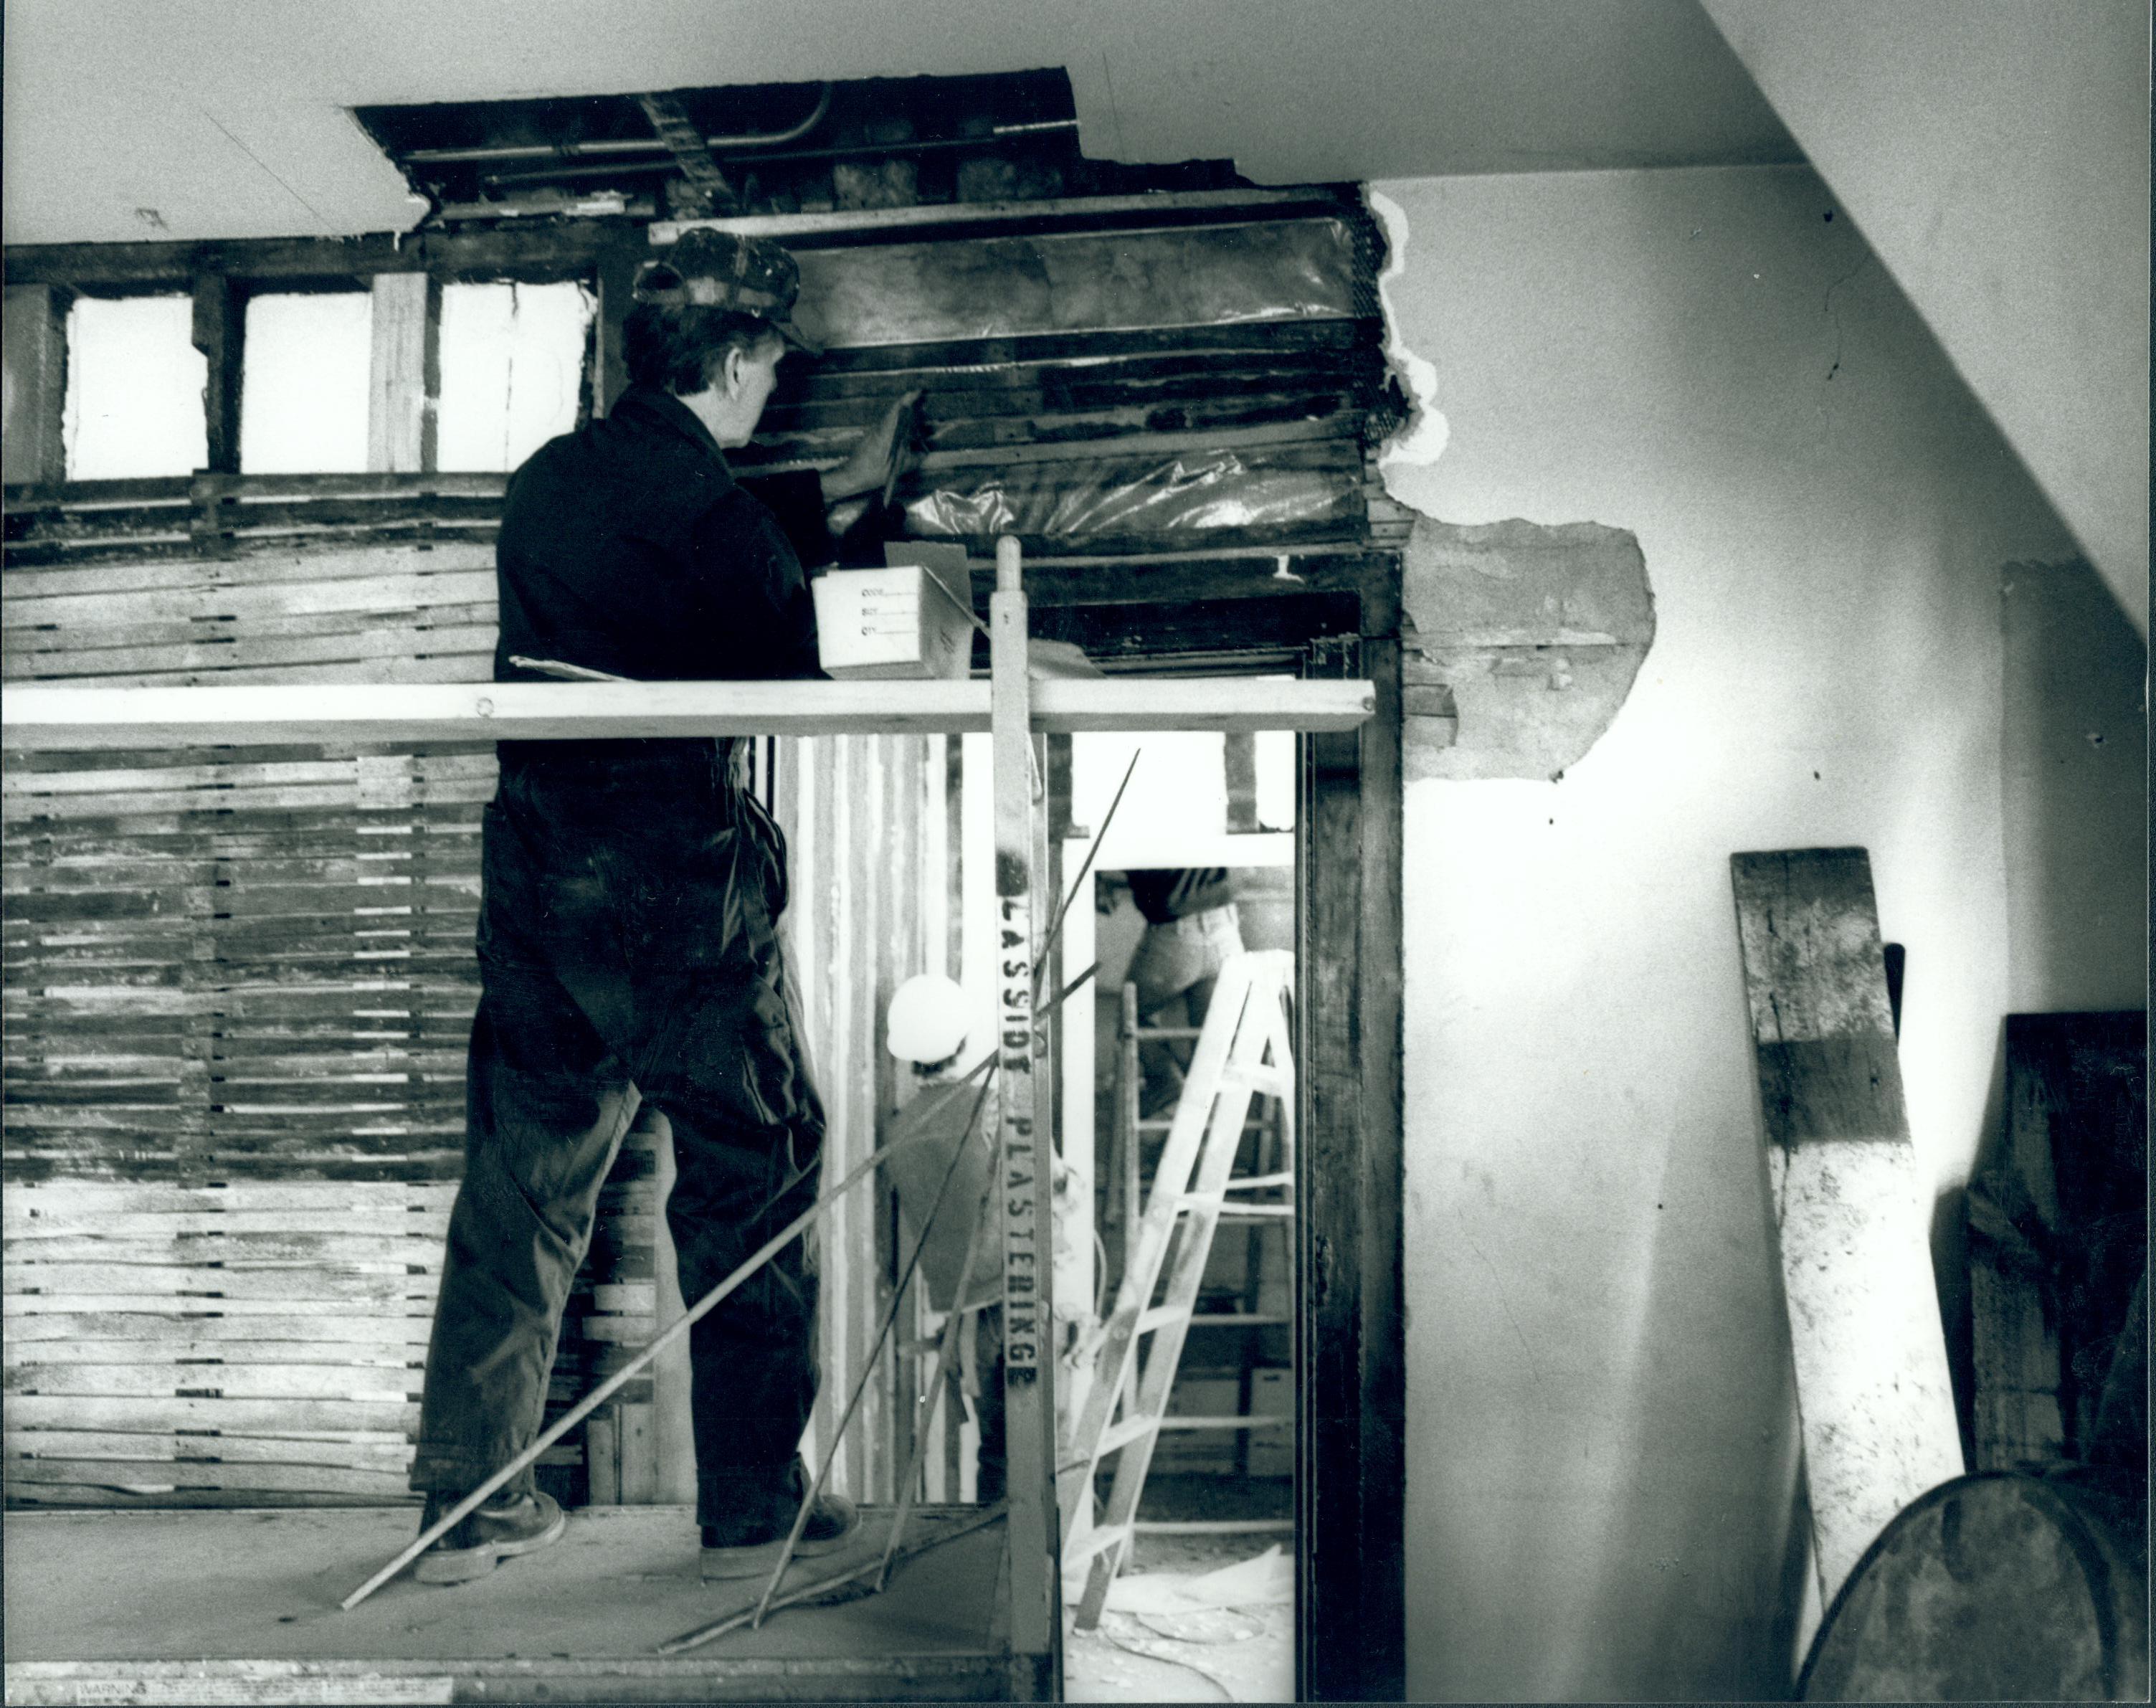 Joe Pree is preparing the interior wall of the kitchen in Lincoln's Home before repairing the plaster. Wherever possible, the original plaster and wall finishes are being preserved. The anticipated completion date for the project is June 16, 1988. Lincoln, Home, Restoration, kitchen